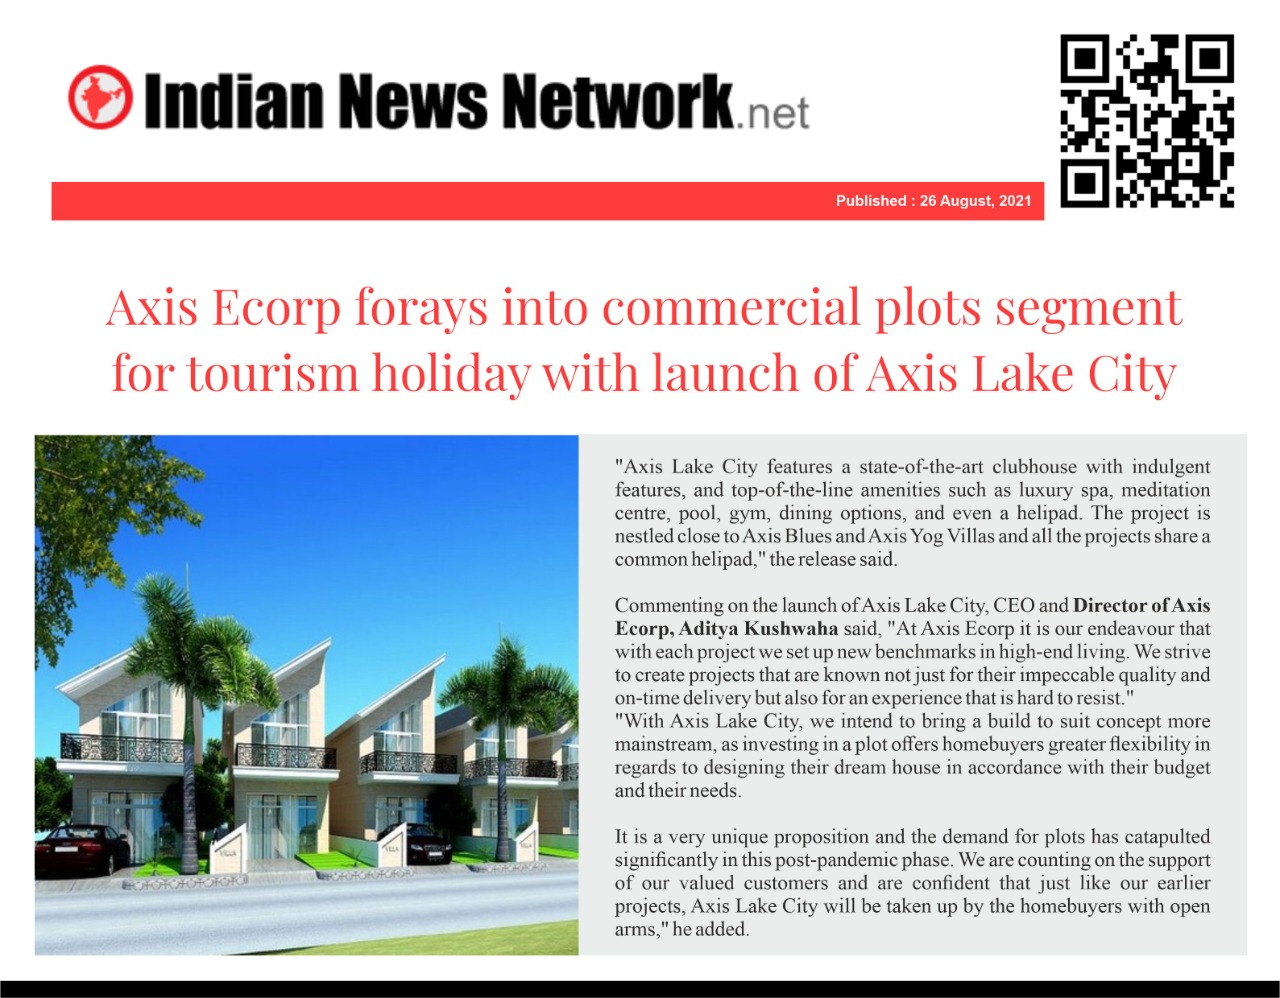 Axis Ecorp forays into commercial plots segment